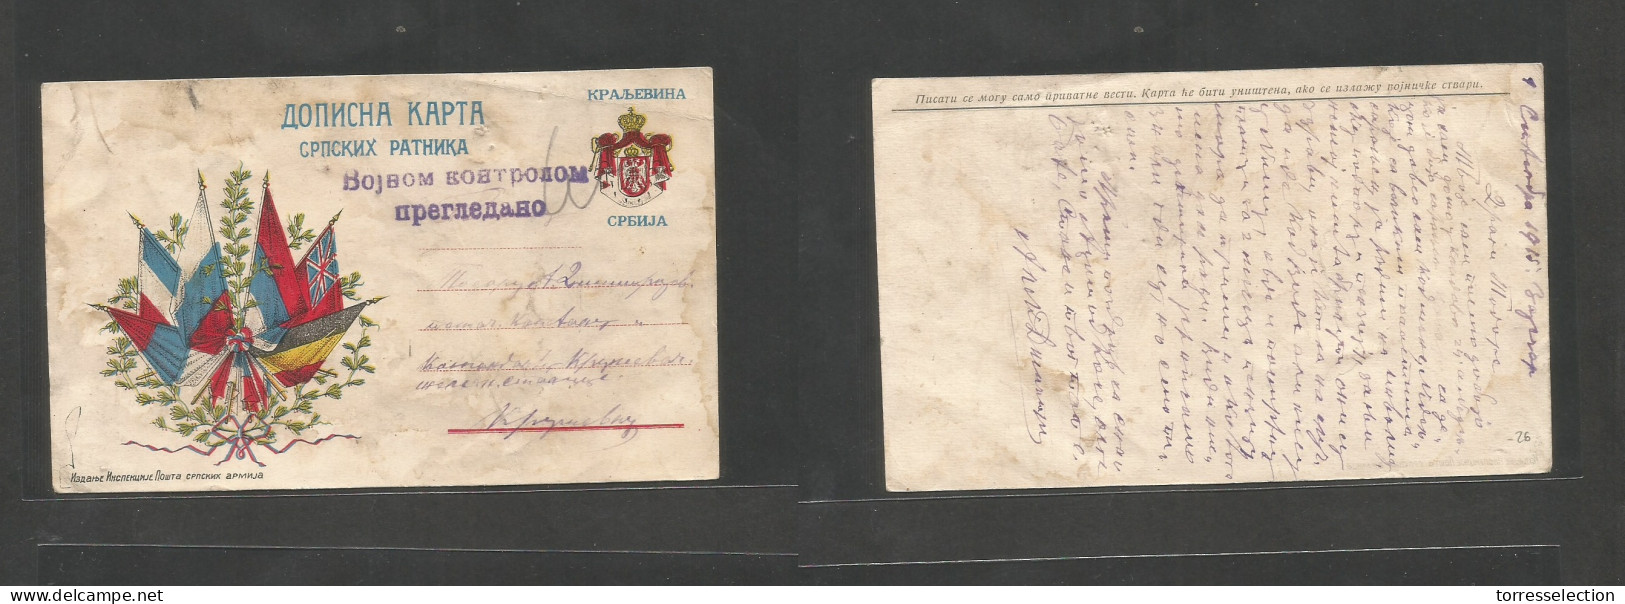 MILITARY MAIL. 1915 (1 Oct) Bagerap - Kleracby. Military FM Color Flags Card. Neat Censor Cachet With Text. Fine. - Correo Militar (PM)